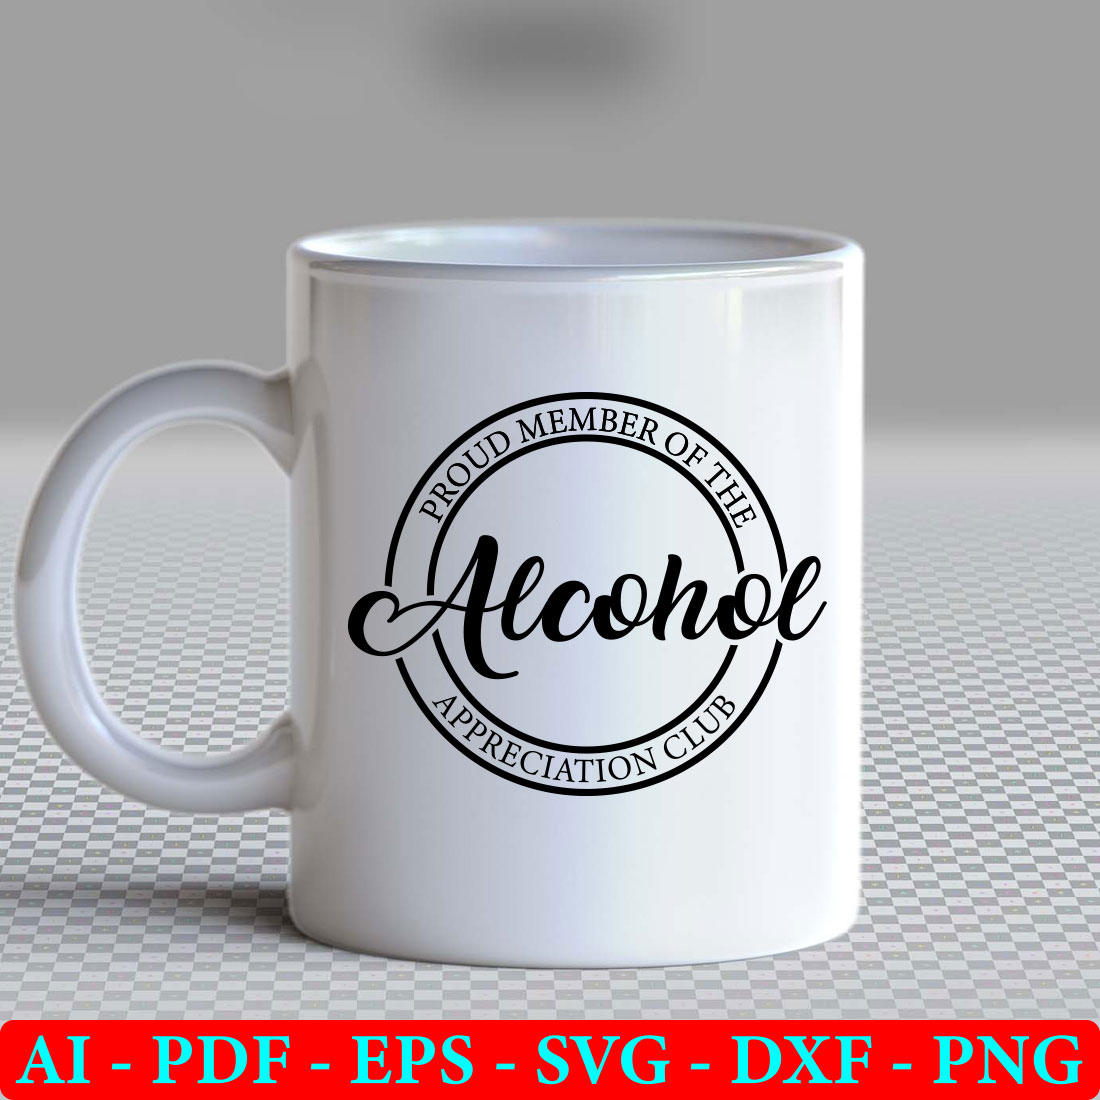 White coffee mug with the word alcohol on it.